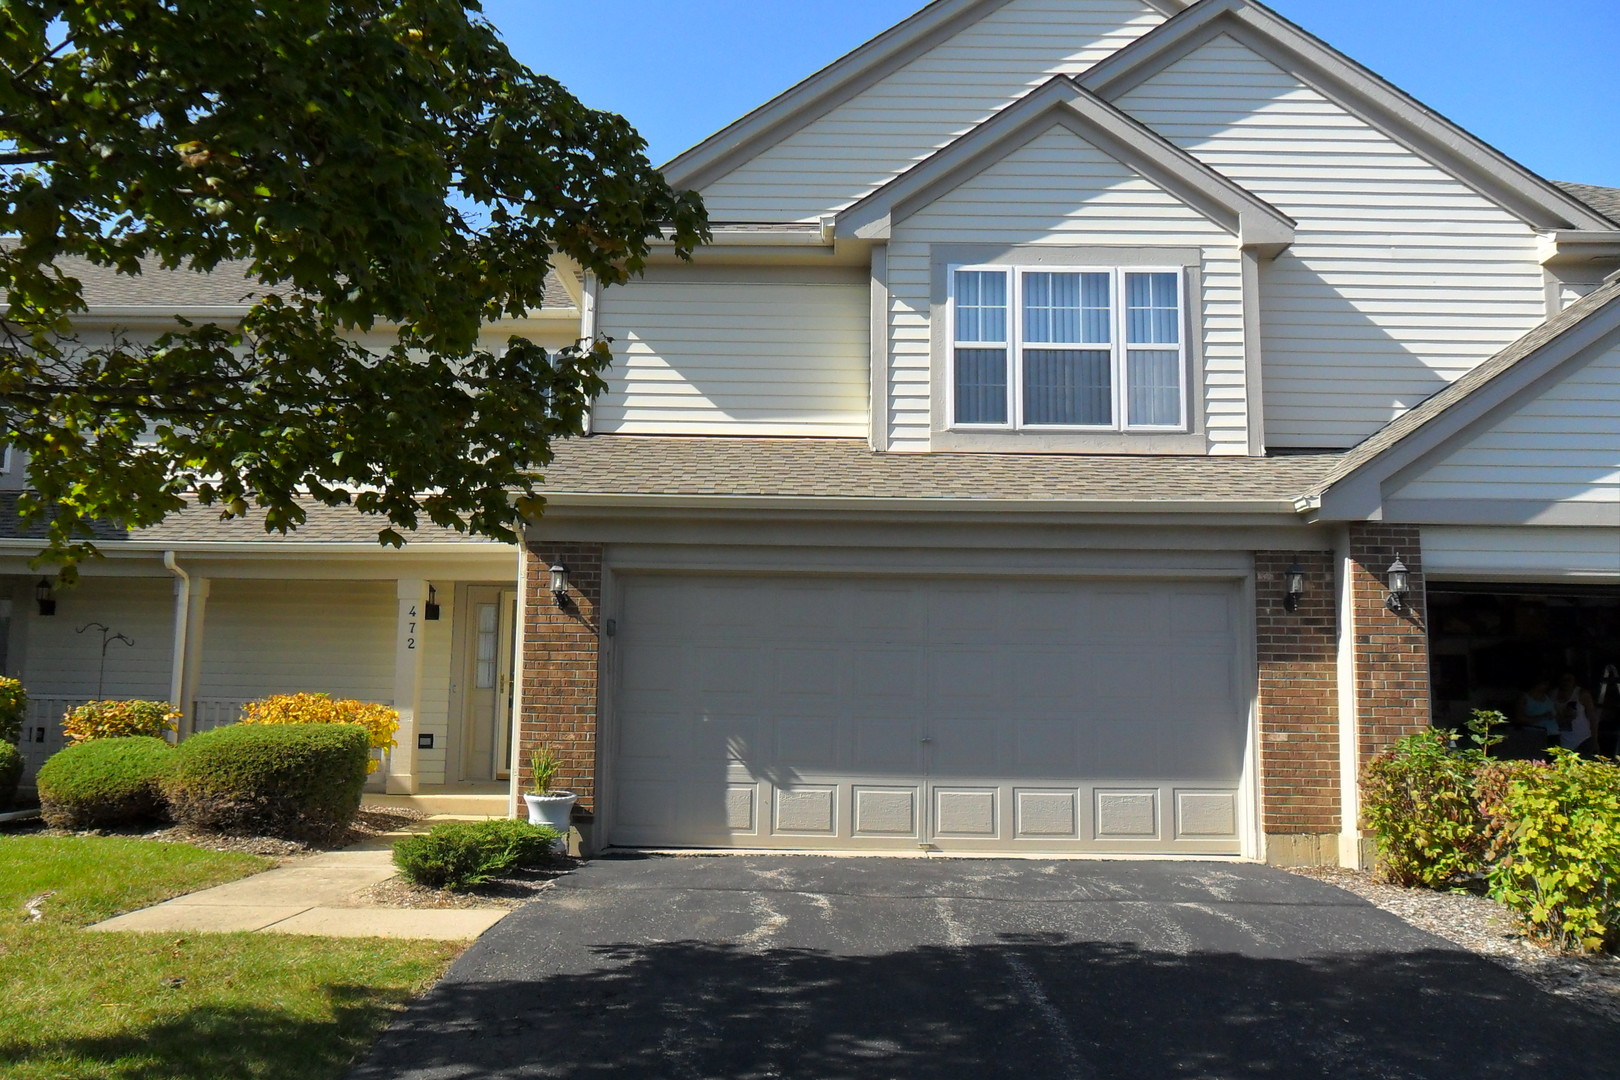 Country Place in Lindenhurst IL Homes for Sale - Country Place in Lindenhurst Real Estate ...